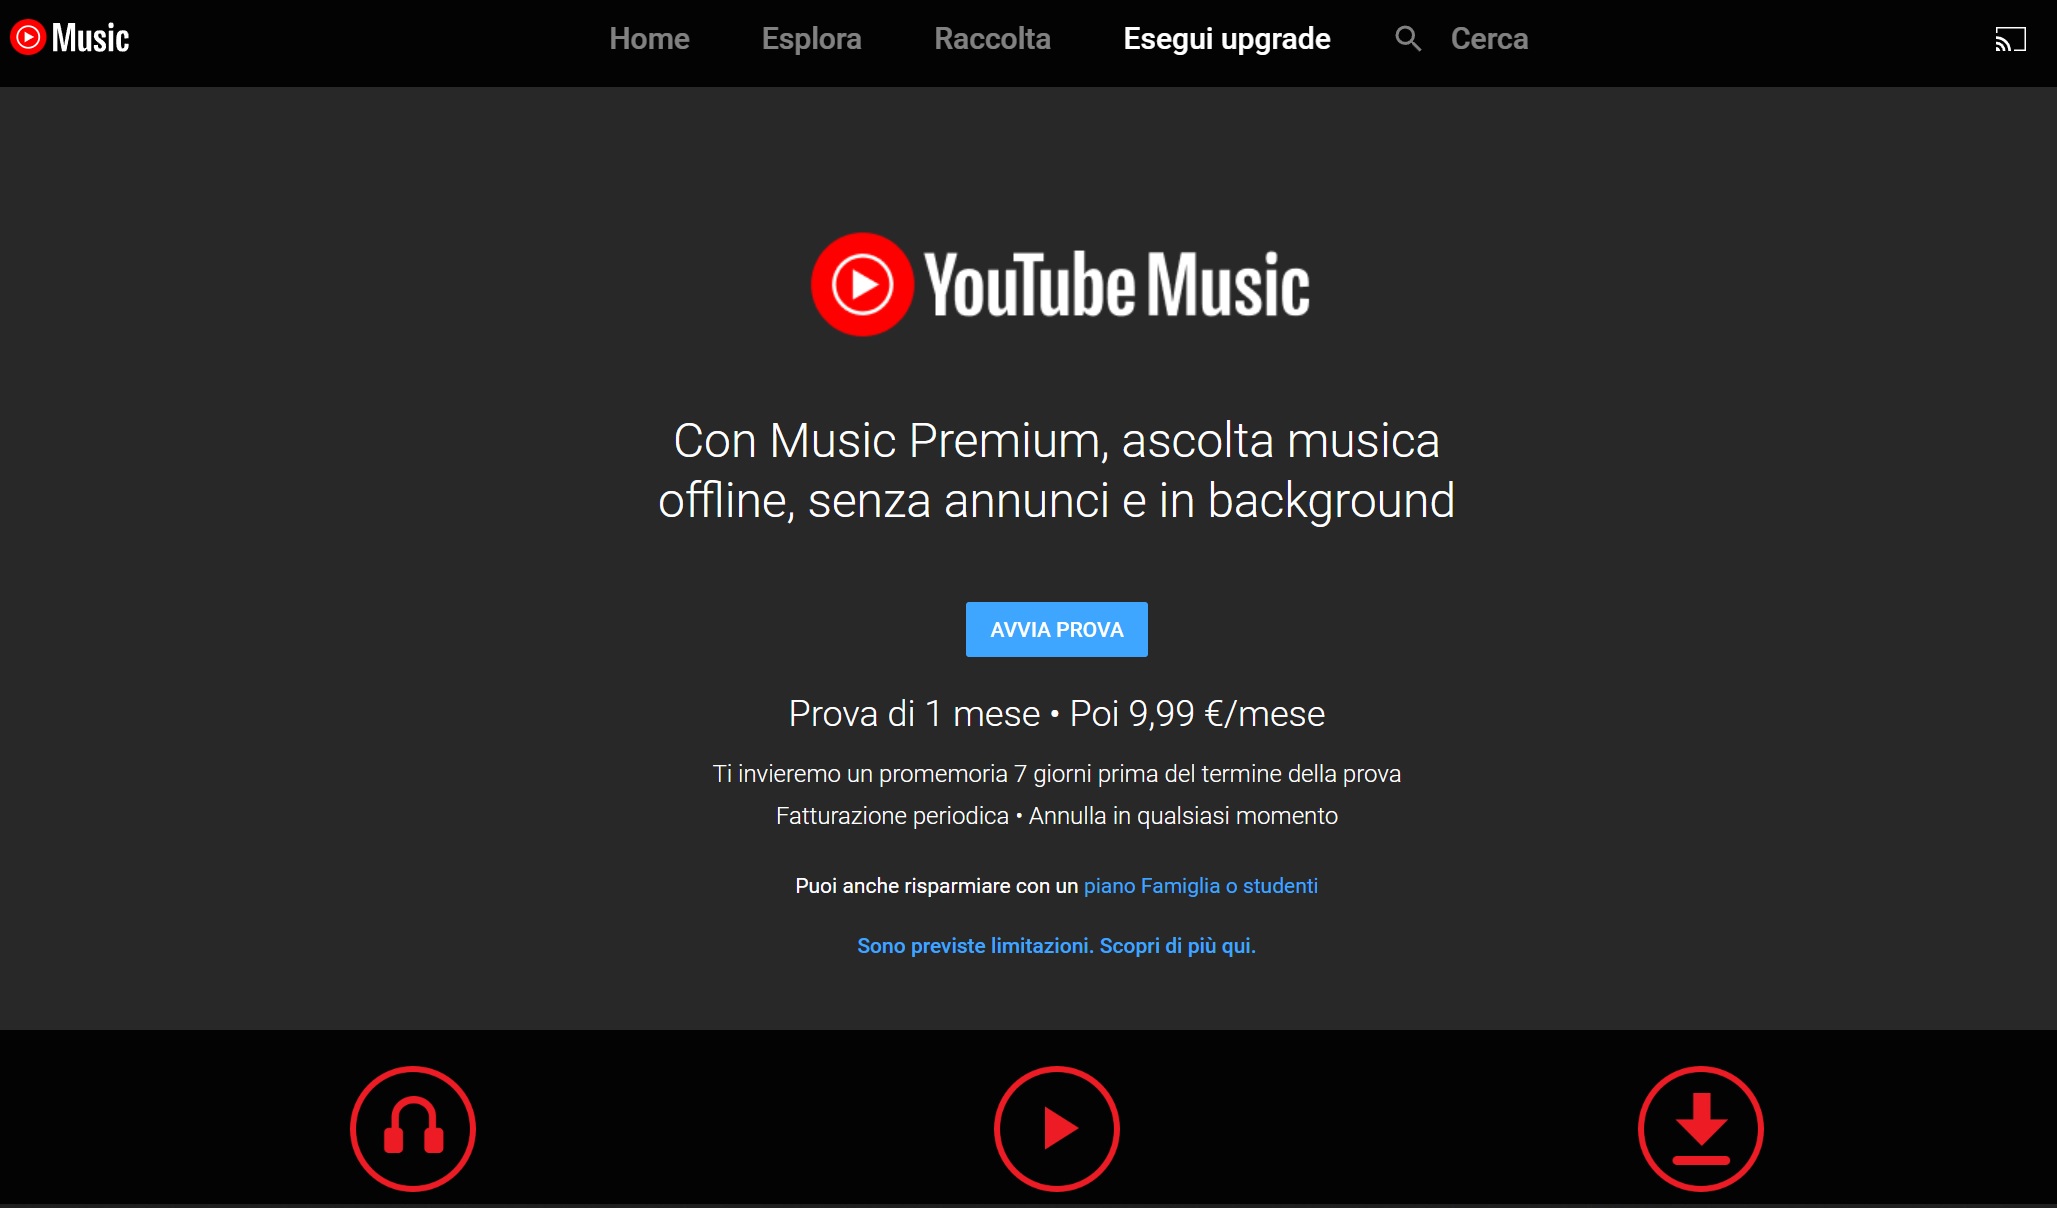 YouTube Music home page